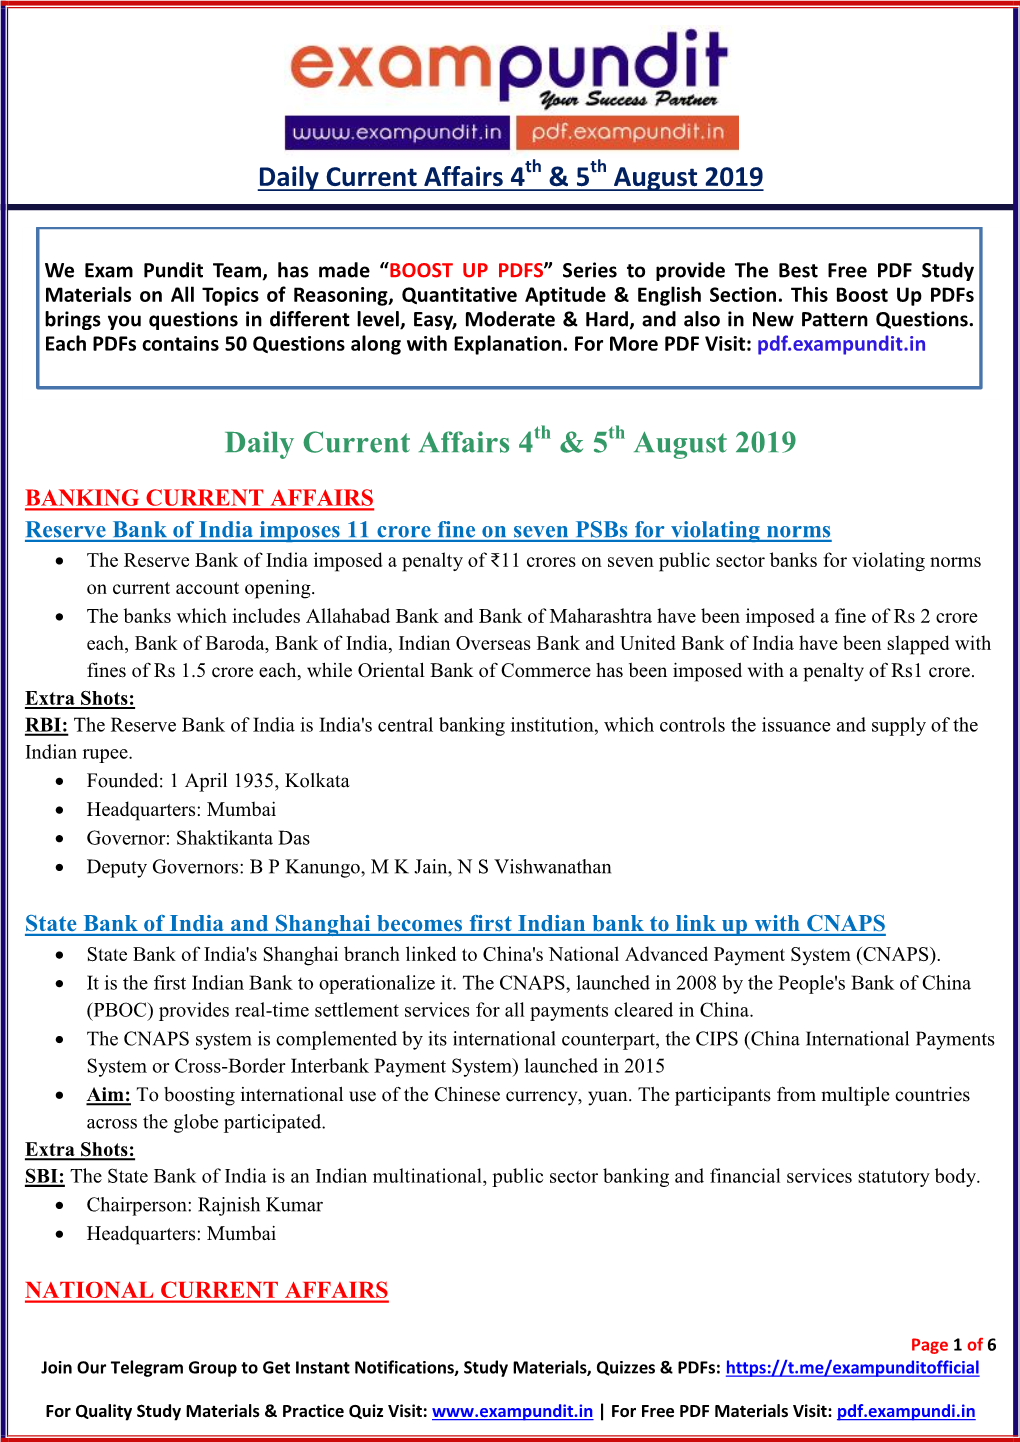 Daily Current Affairs 4 & 5 August 2019